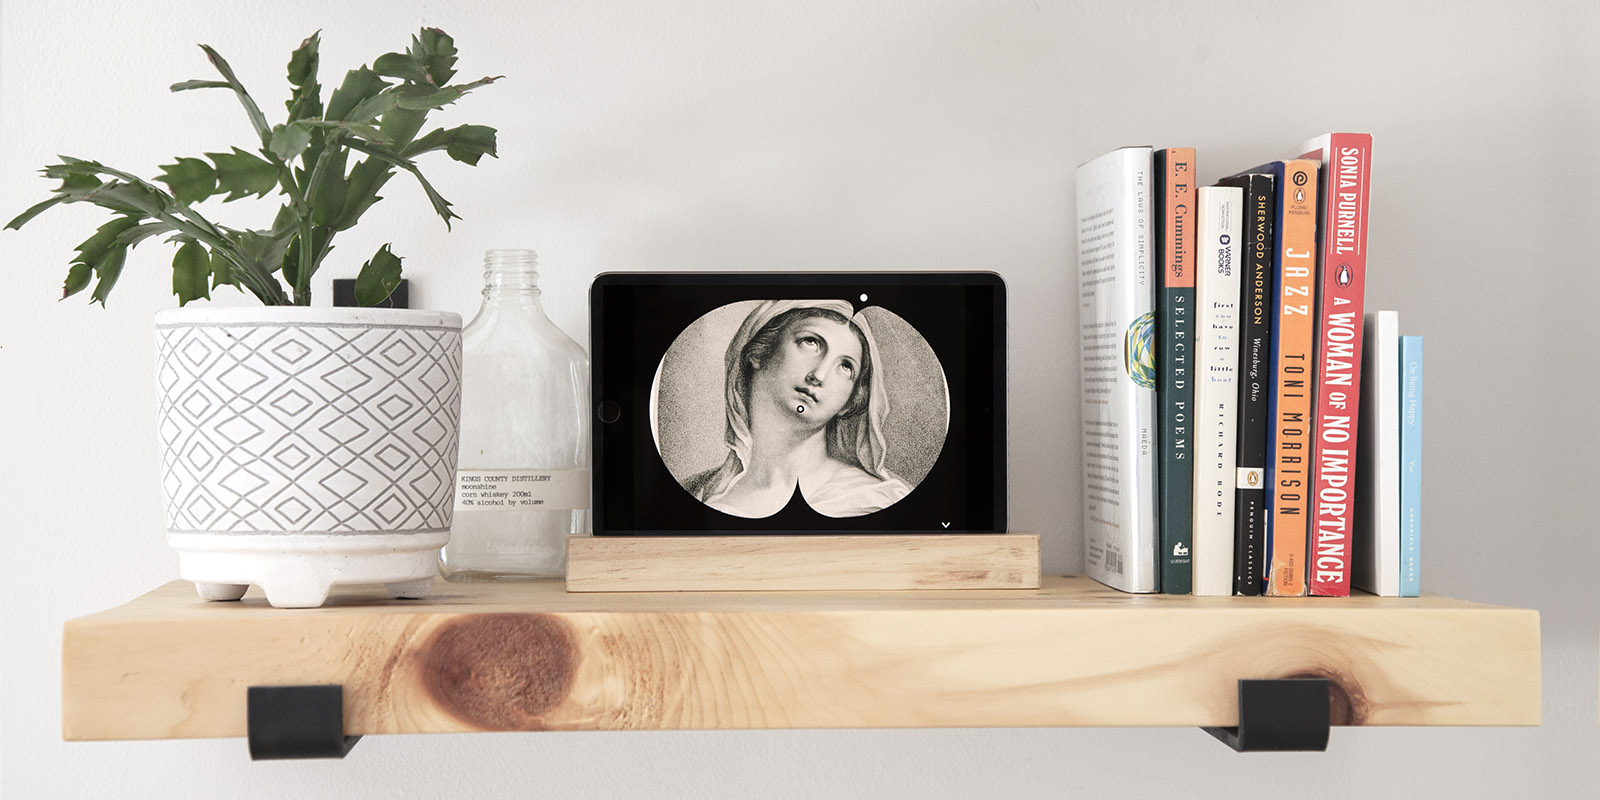 The finished Art Clock displayed on a horizontal tablet sitting on a light wood shelf with books to the right and a Christmas cactus to the left. The Art Clock shows a close cropped etching of a medieval figure with the minute hand pointed to their chin (at 30 past the hour) and the hour hand a 1pm, corresponding to the angle of the figure's eyes.